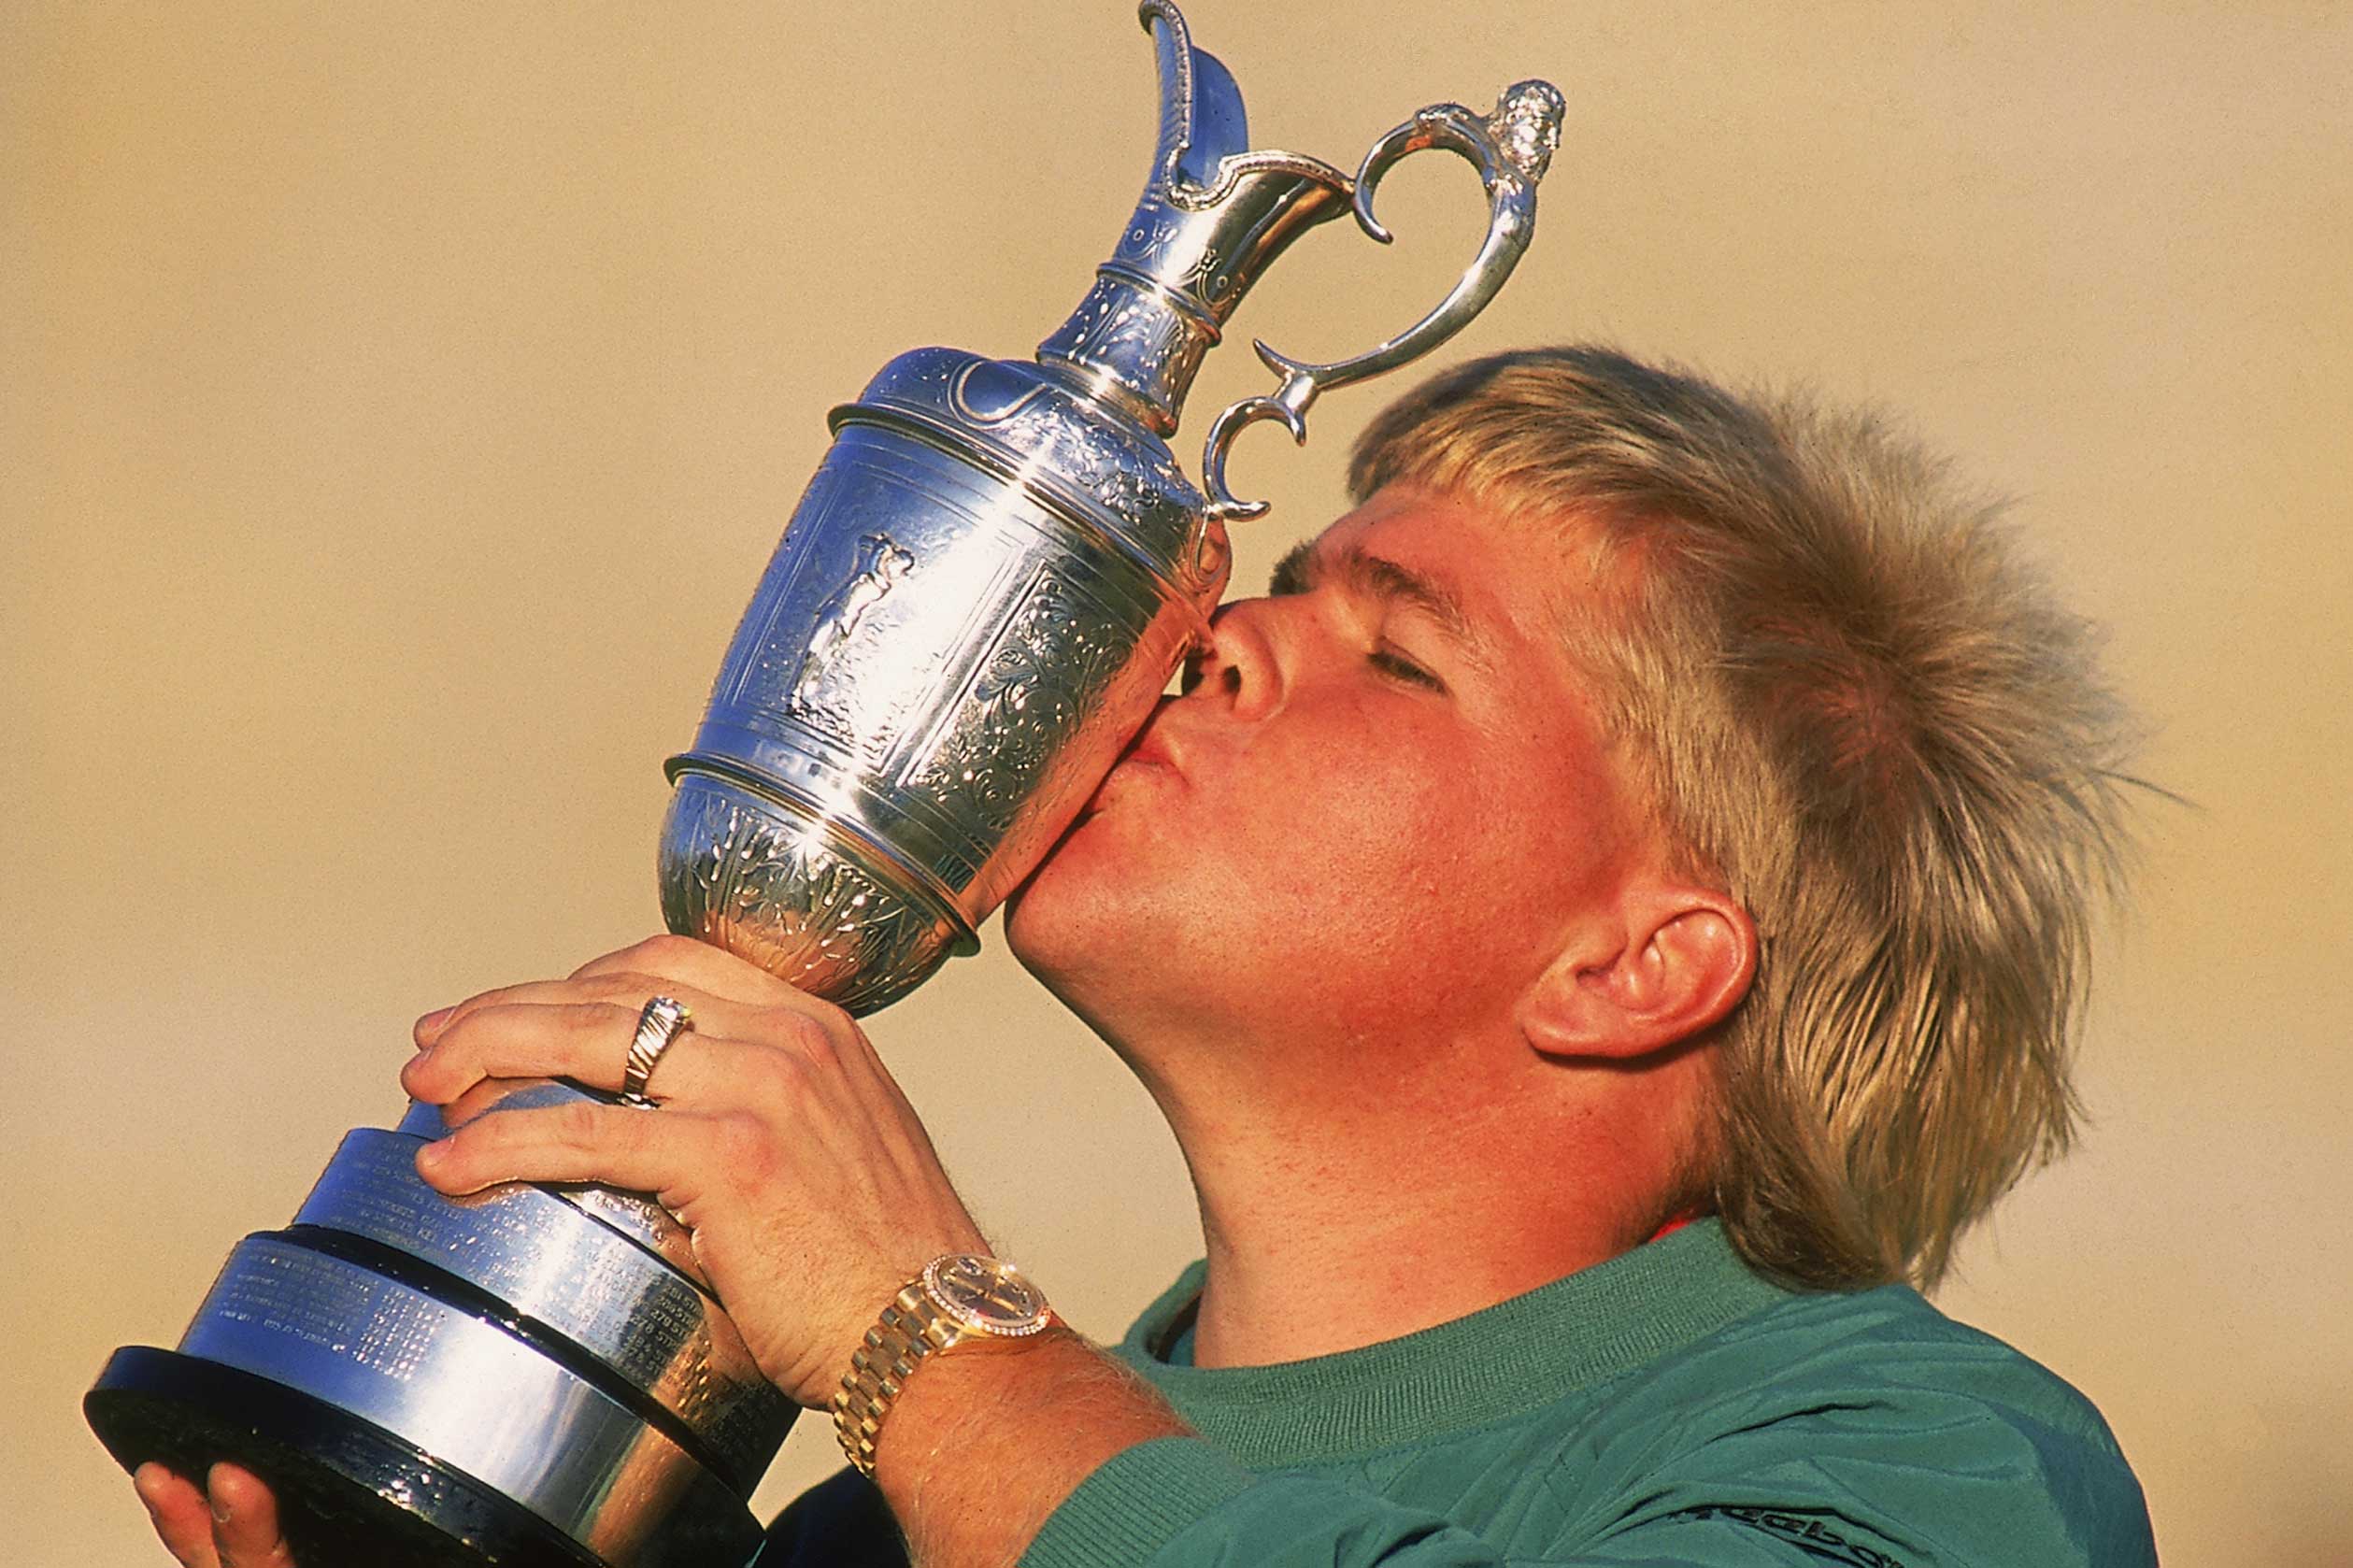 John Daly kisses the Claret Jug in 1995 (Photo: Getty Images)